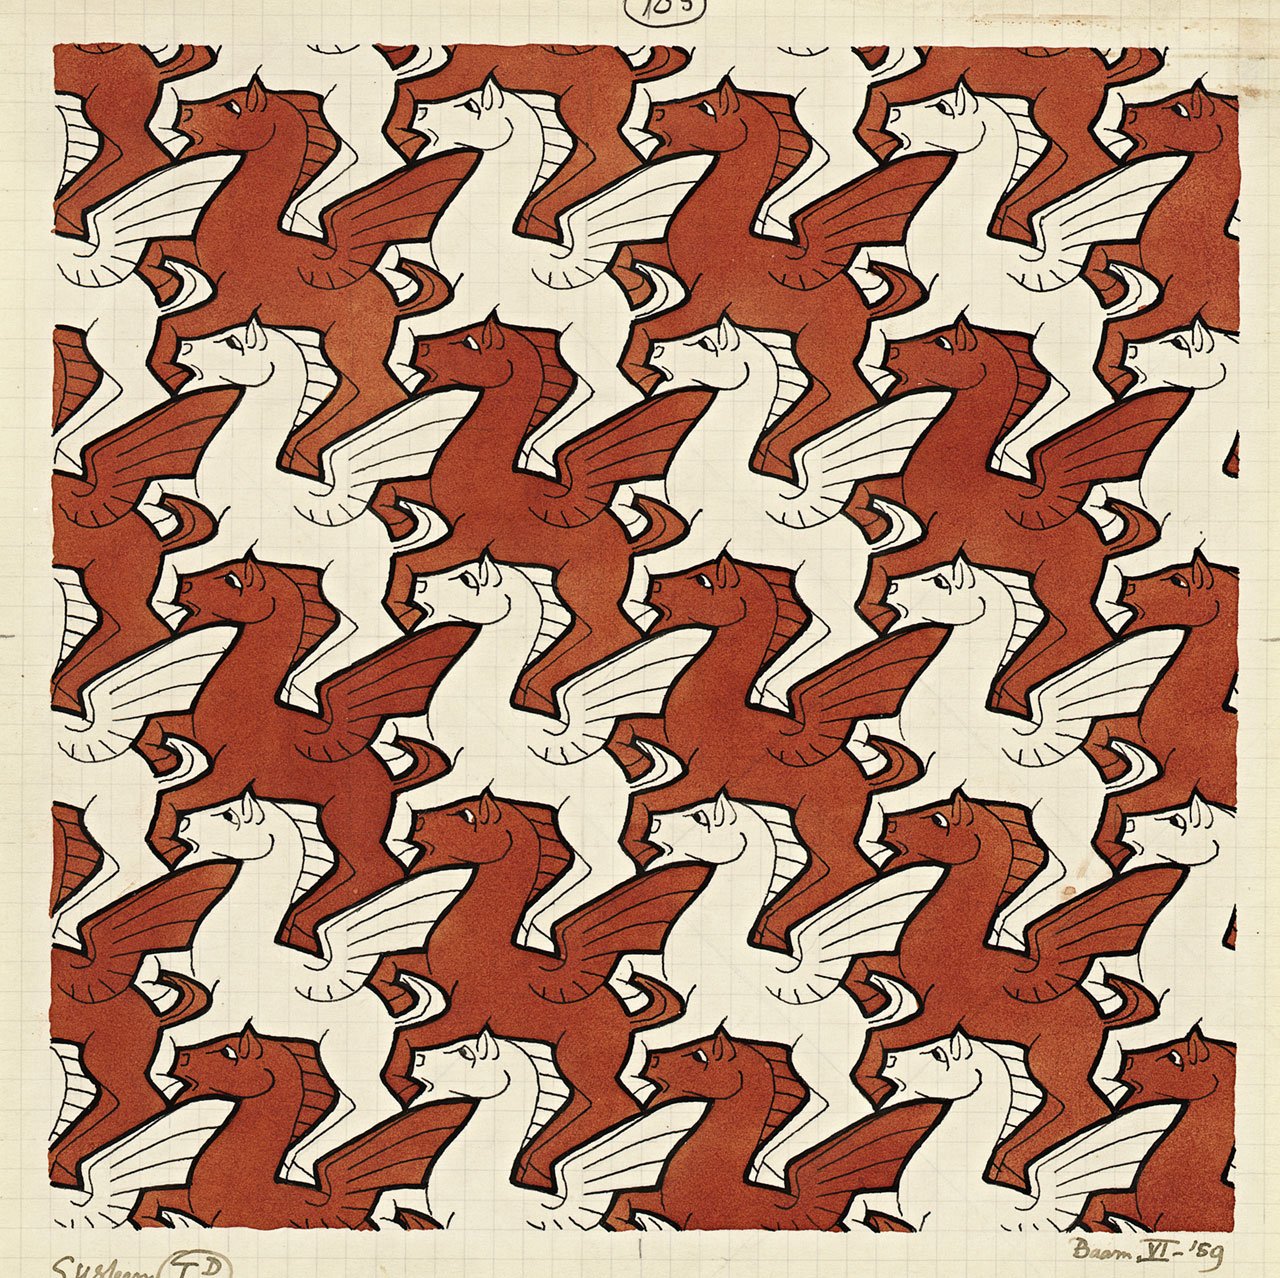 M. C. Escher, Regular division of the plane no. 105 (Pegasus) June 1959, pen and ink, pencil and watercolour on graph paper. Escher Collection, Gemeentemuseum Den Haag, The Hague, the Netherlands © The M. C. Escher Company, the Netherlands. All rights reserved. 